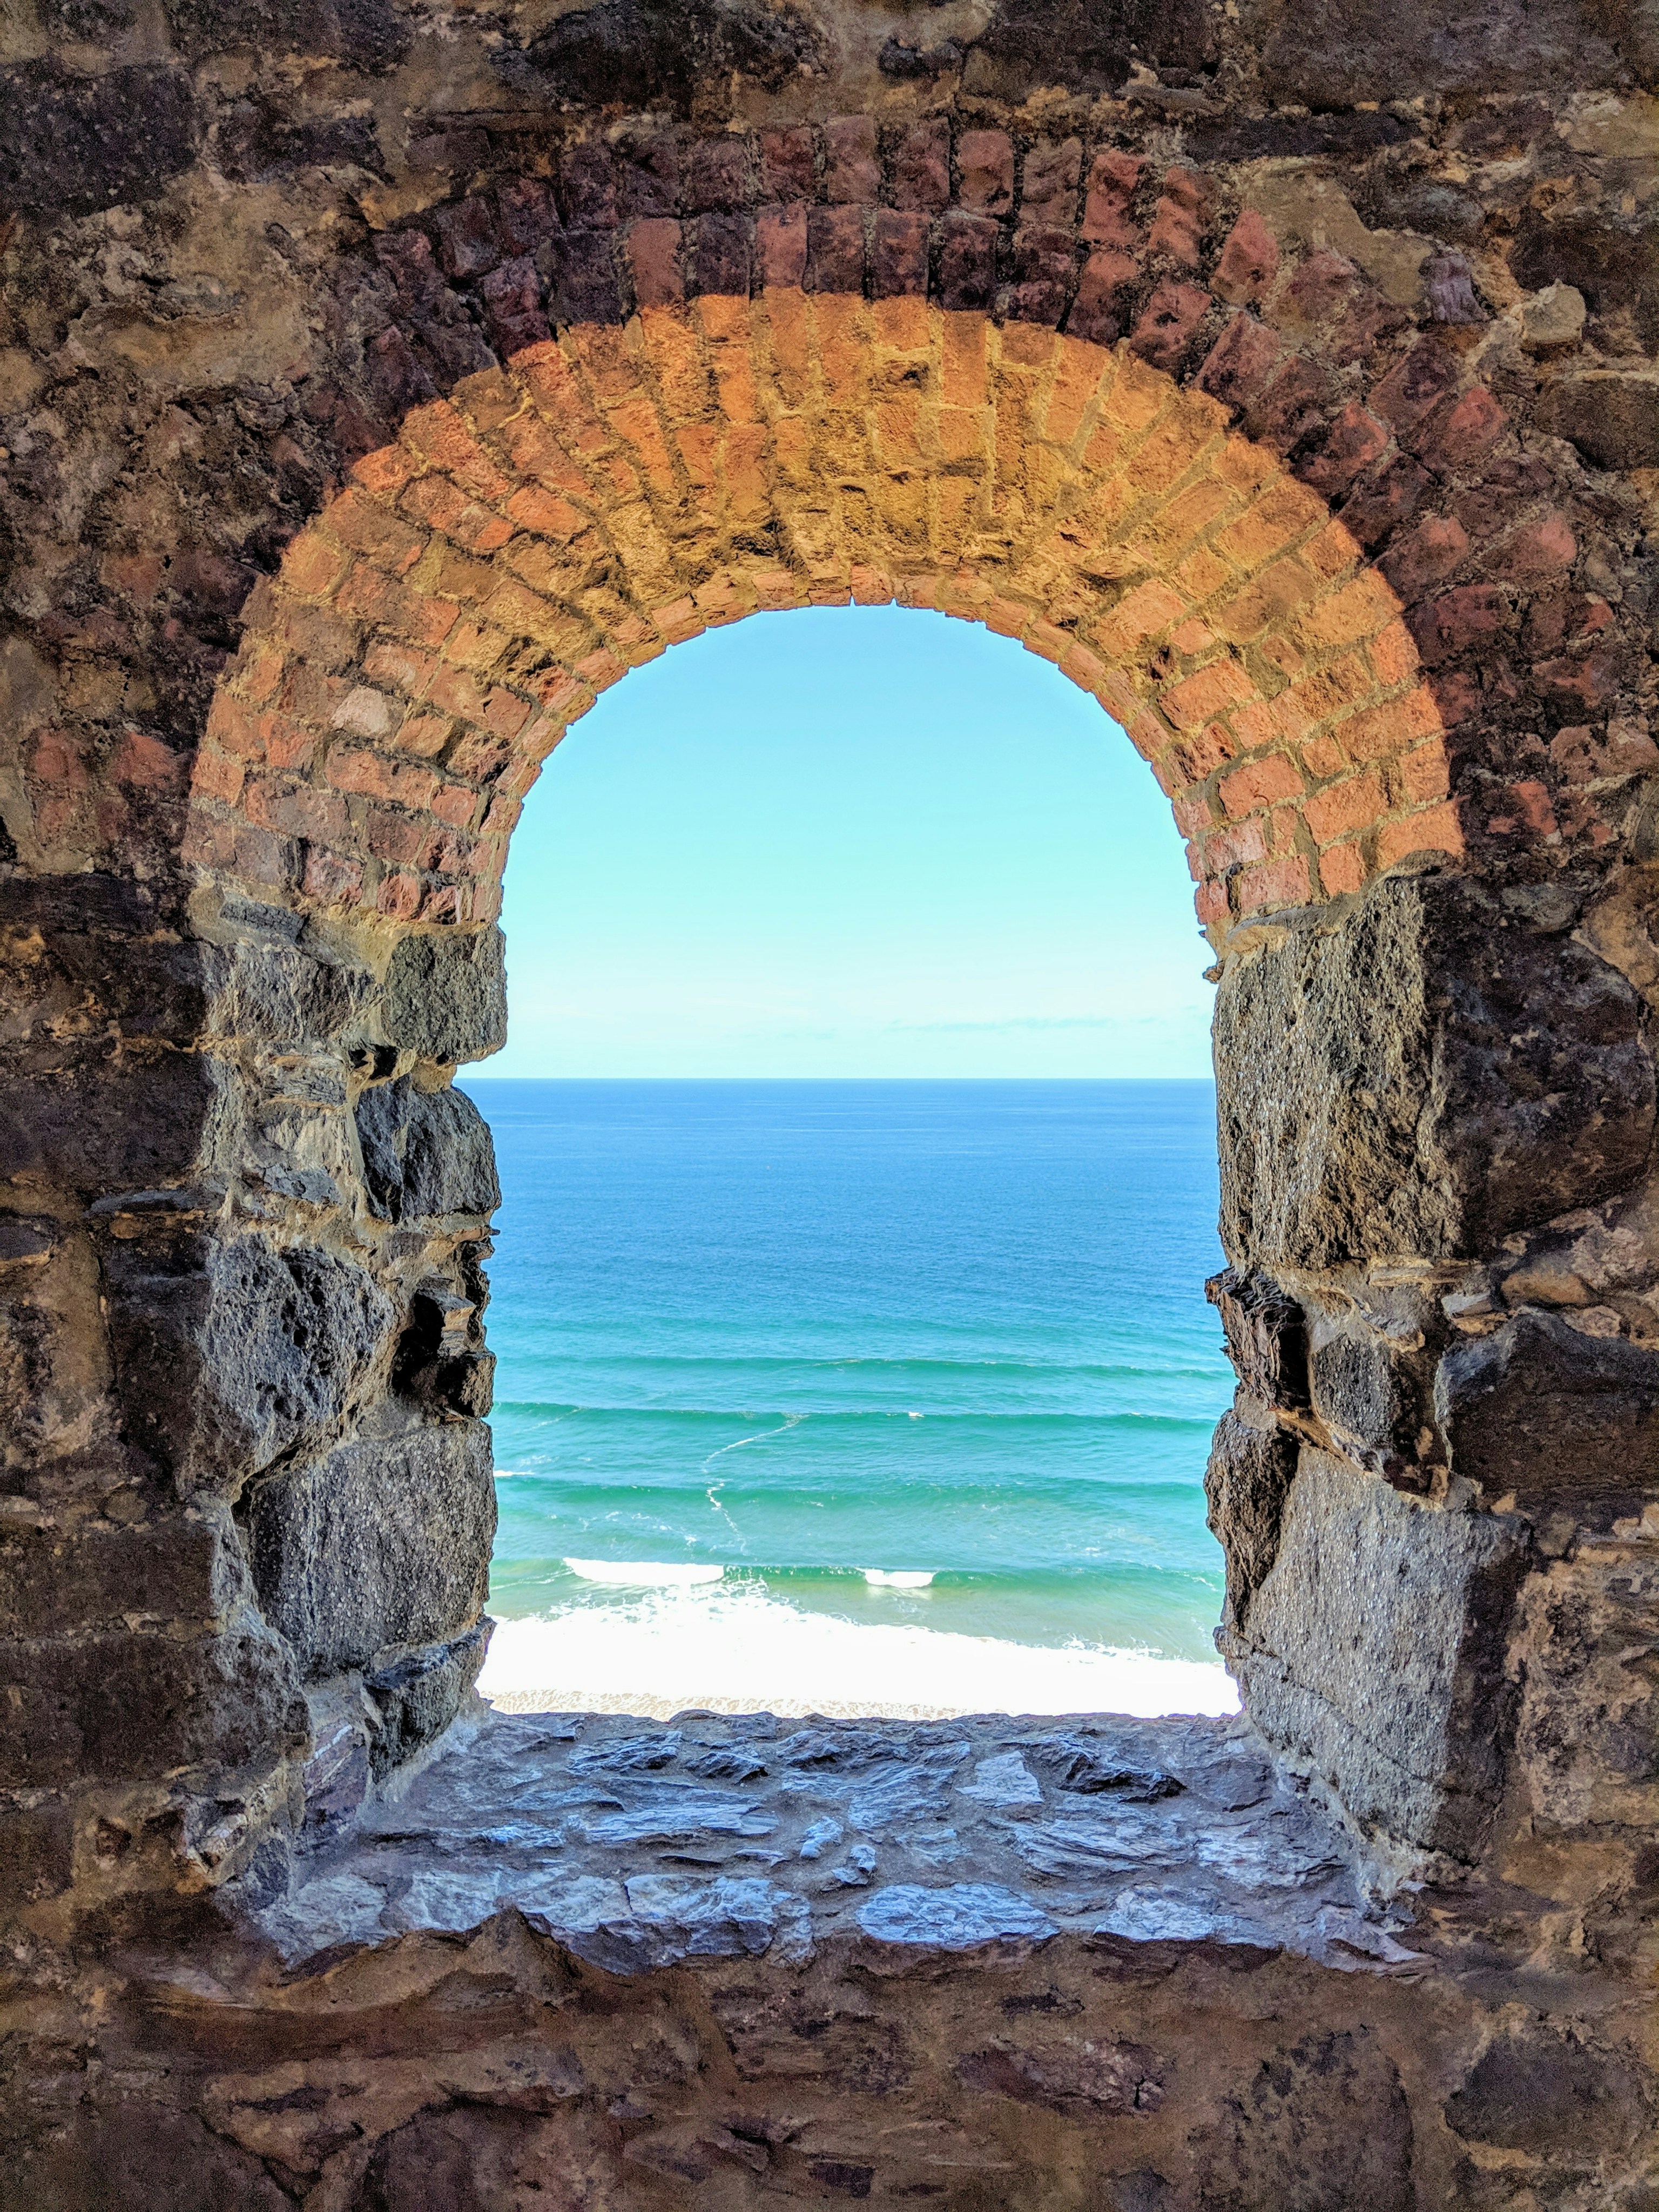 Looking through Wheal Coates Mine, St Agnes, by Danilo D'Agostino